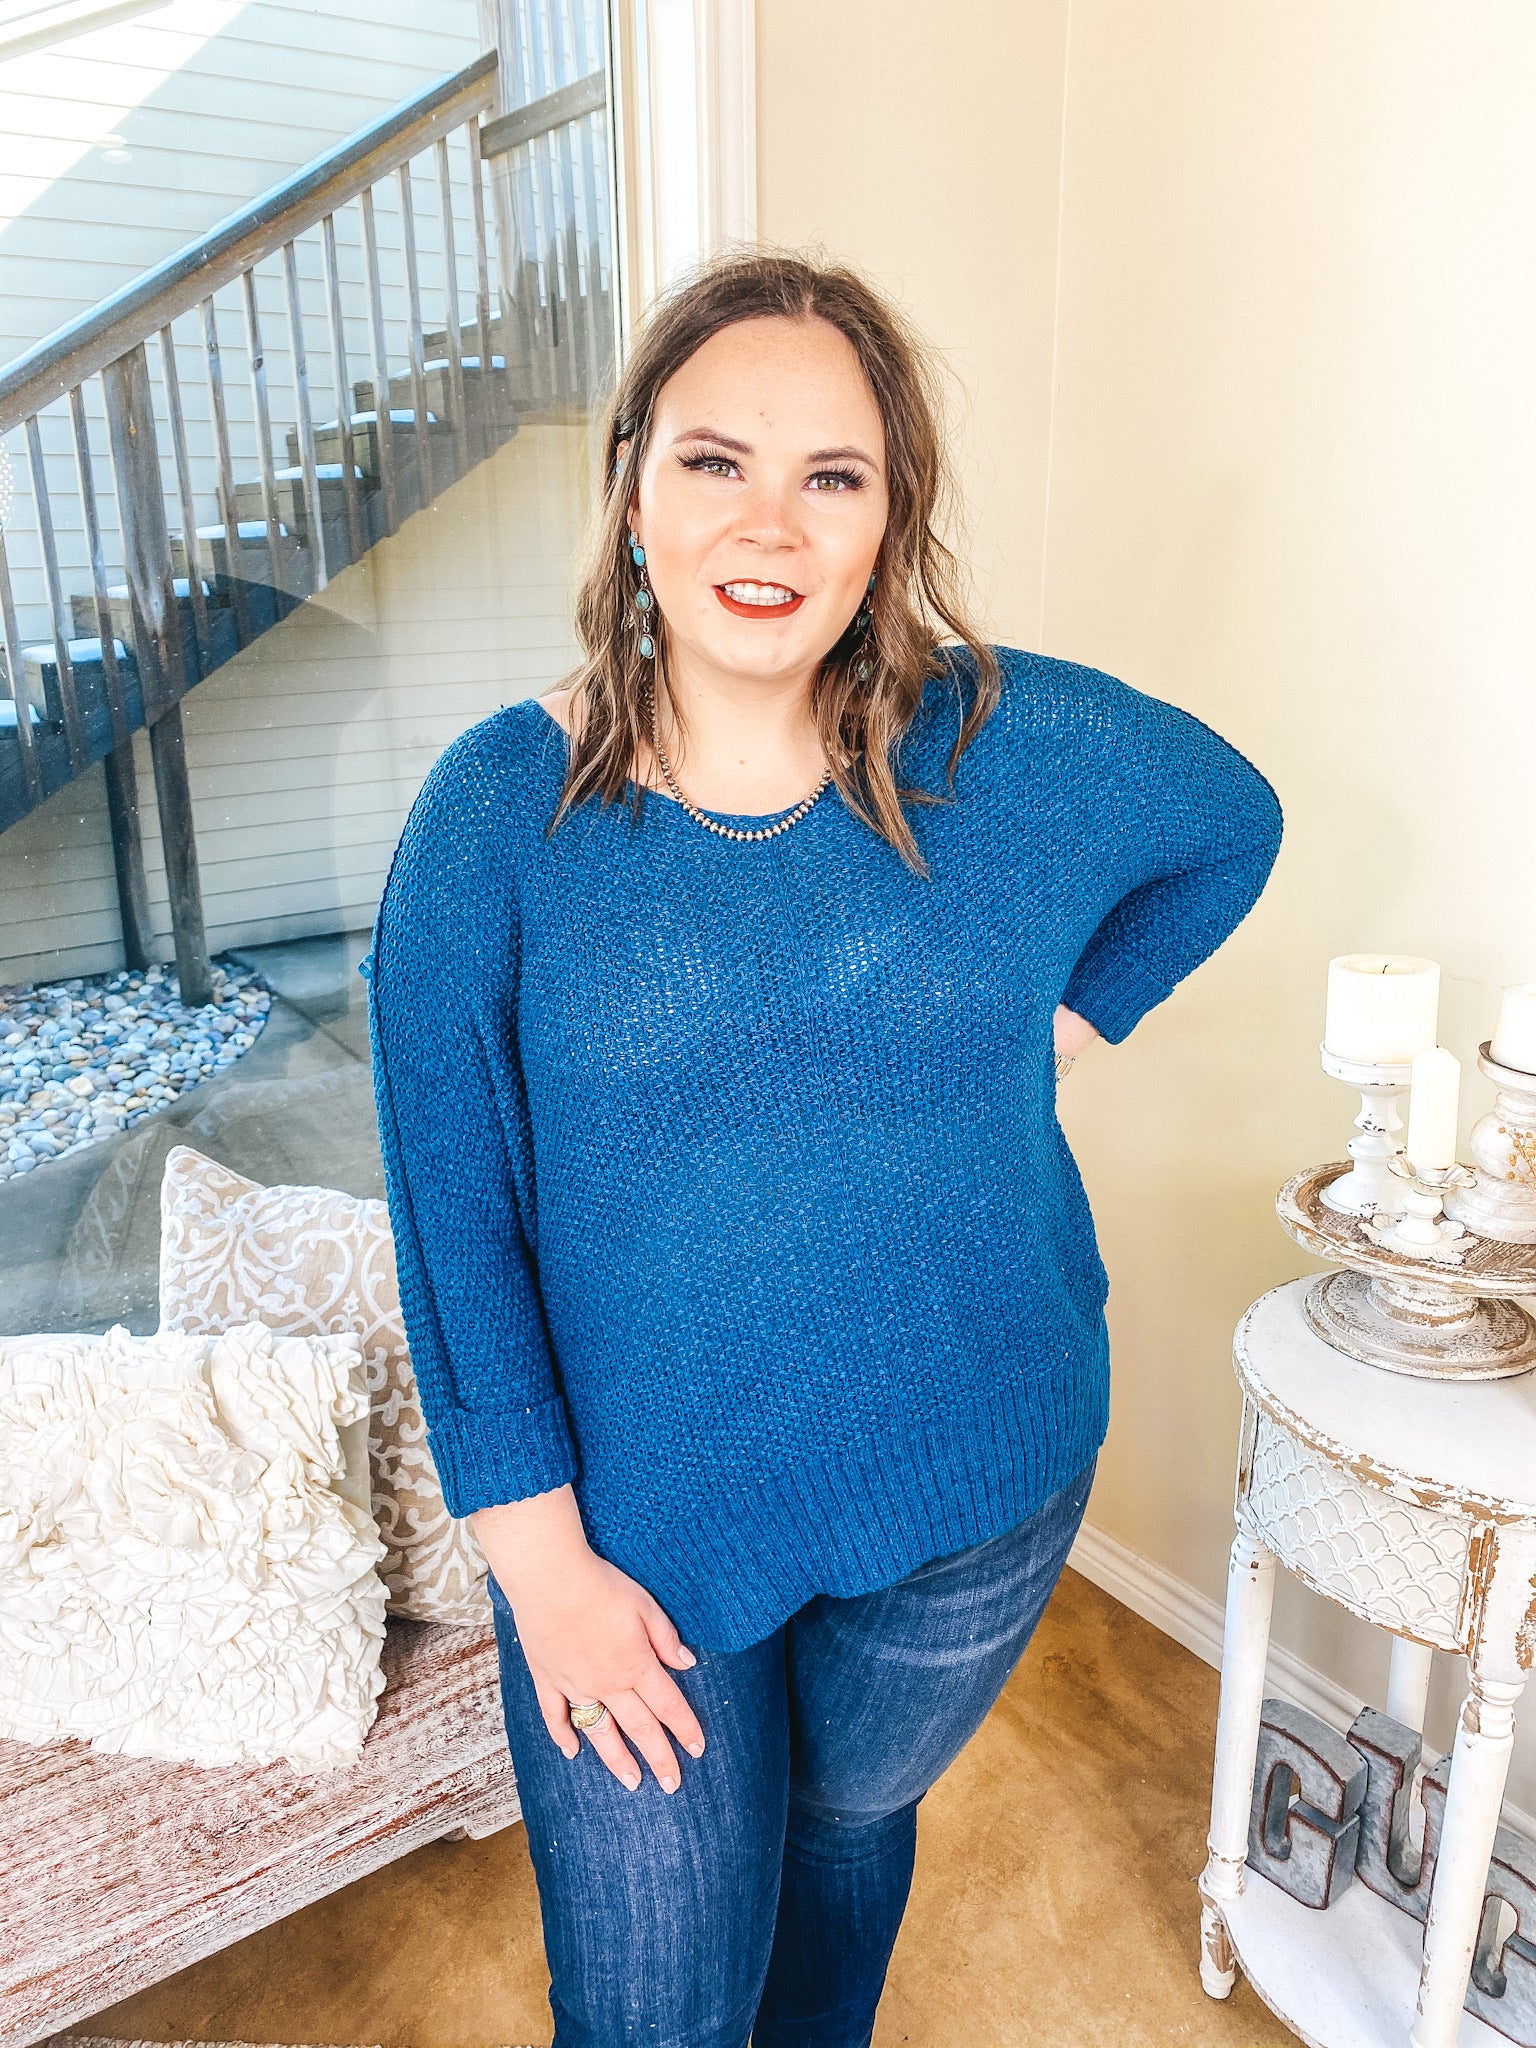 Last Chance | With All My Heart Oversized Knit Sweater in Teal Blue - Giddy Up Glamour Boutique